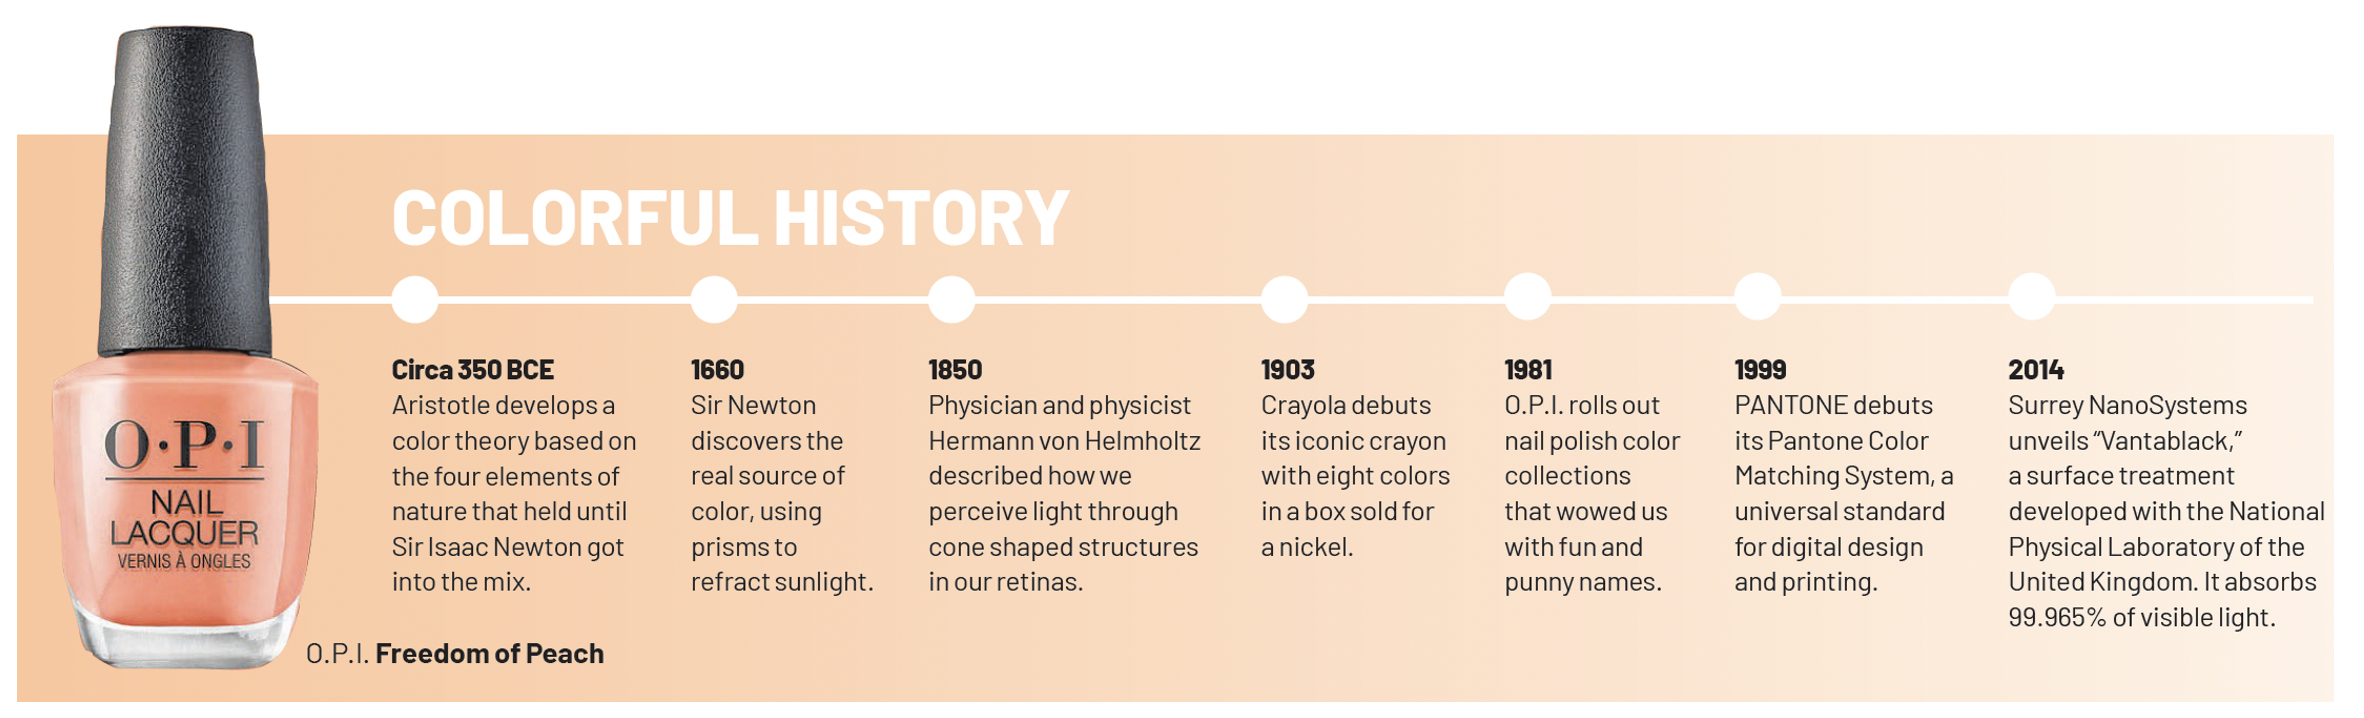 Colorful History: A timeline Circa 350 BCE Aristotle develops a color theory based on the four elements of nature that held until Sir Isaac Newton got in the mix. 1660 Sir Newton discovers the real source of color, using prisms to refract sunlight. 1850 Physician and physicist Hermann von Helmholtz described how we perceive light through cone shaped structures in our retinas. 1903 Crayola debuts its iconic crayon with eight colors in a box sold for a nickel. 1981 O.P.I. rolls out nail polish color collections that wowed us with fun and punny names. 1999 PANTONE debuts its Pantone Color Matching System, a universal standard for digital design and printing. 2014 Surrey NanoSystems unveils “Vantablack,” a surface treatment developed with the National Physical Laboratory of the United Kingdom. It absorbs 99.965% of visible light. 